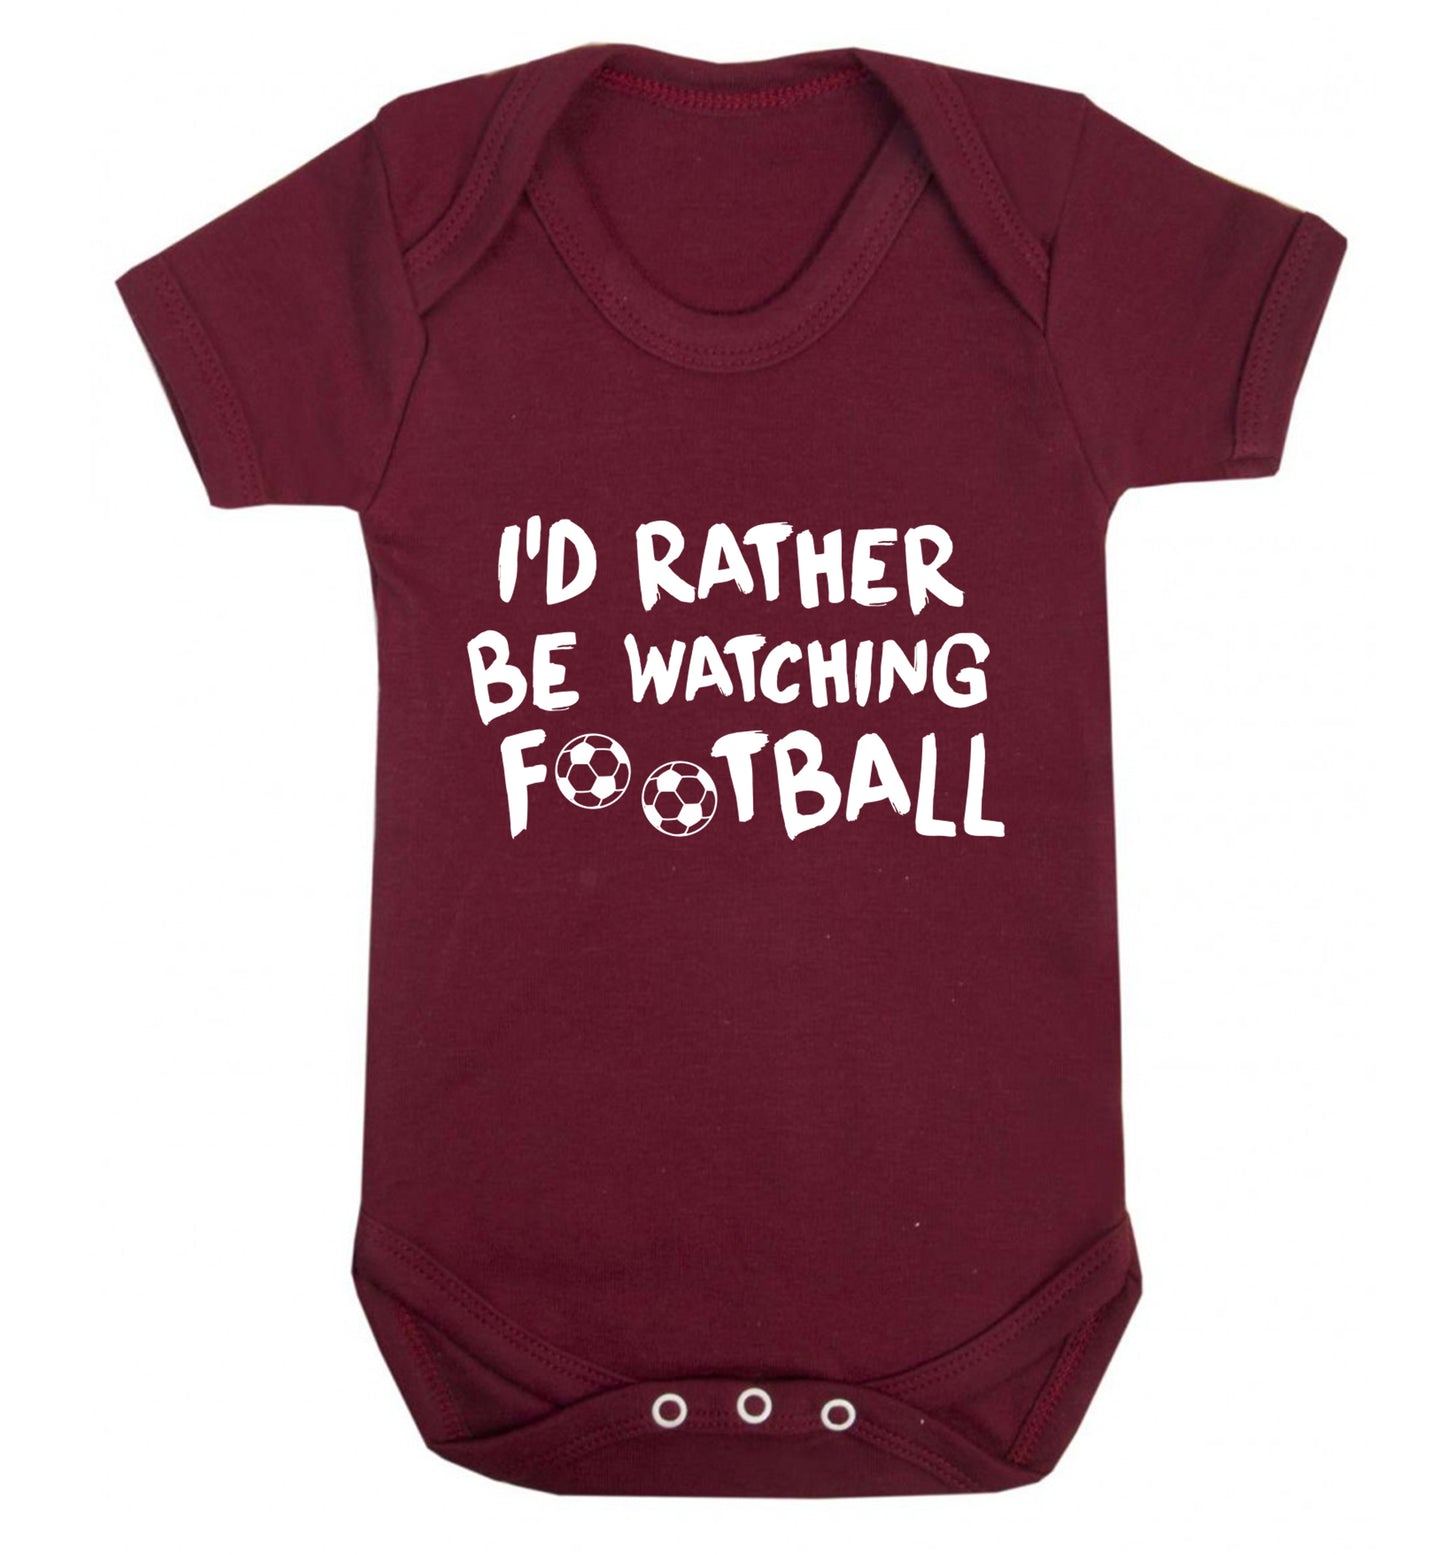 I'd rather be watching football Baby Vest maroon 18-24 months